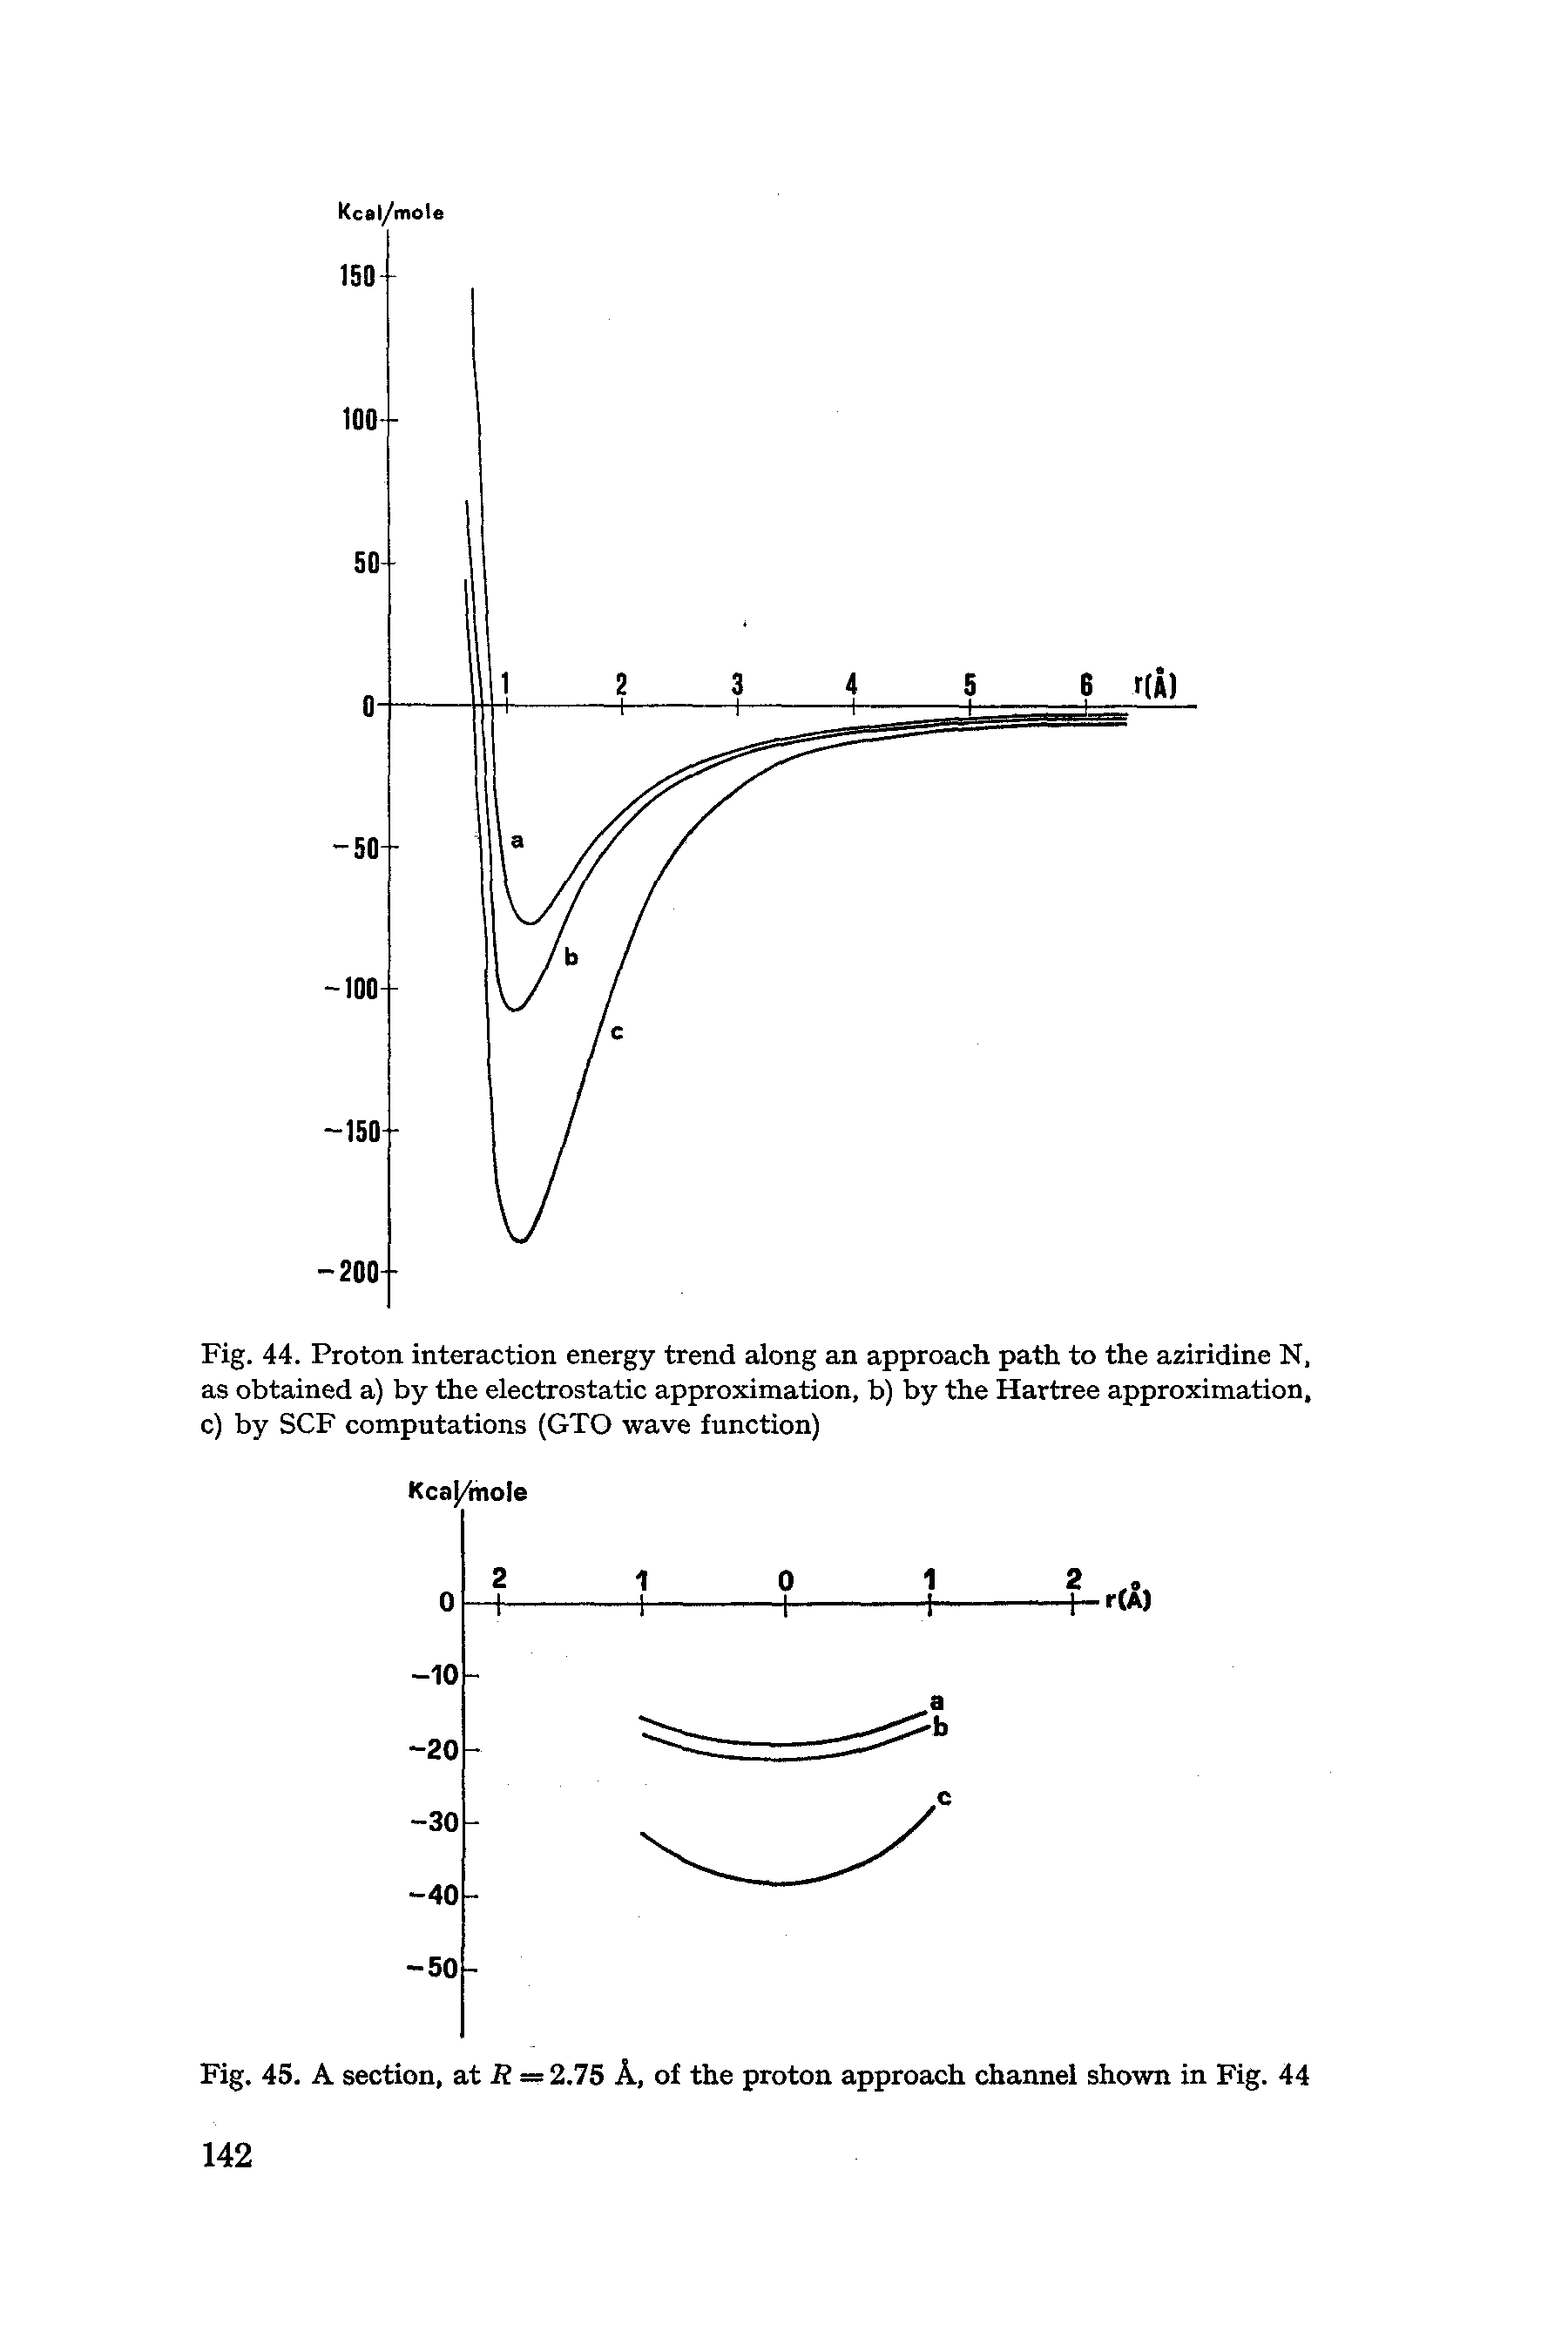 Fig. 44. Proton interaction energy trend along an approach path to the aziridine N. as obtained a) by the electrostatic approximation, b) by the Hartree approximation, c) by SCF computations (GTO wave function)...